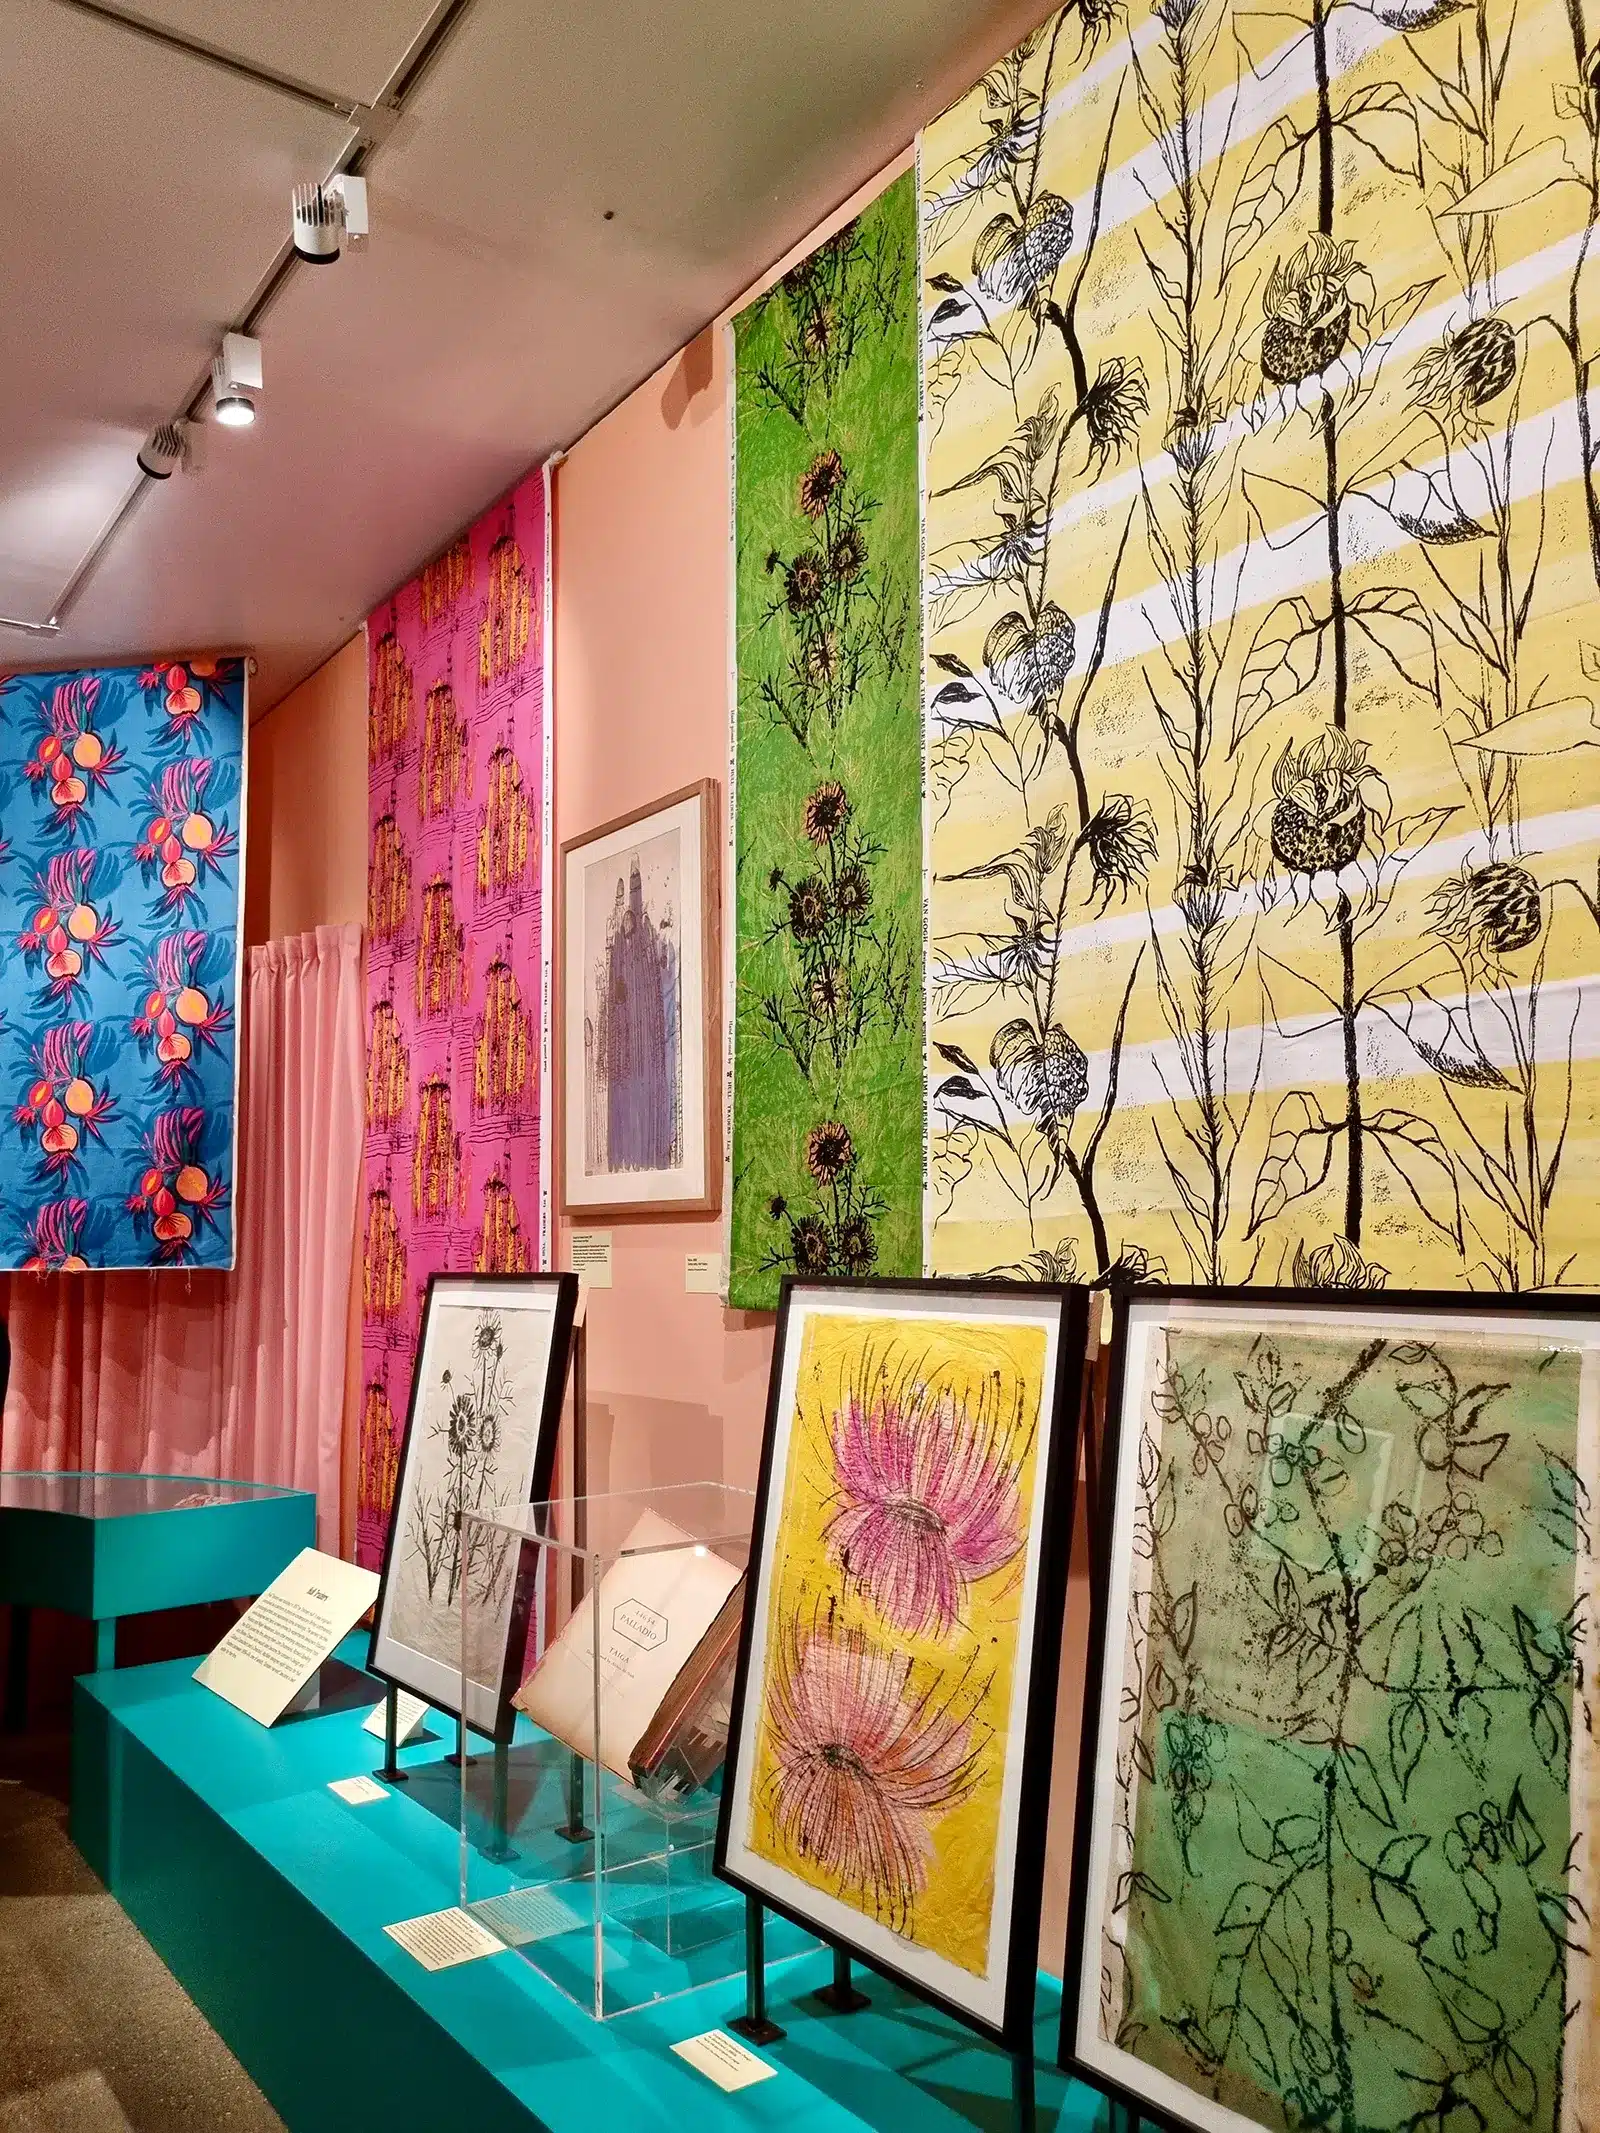 A display of colorful prints on display in a museum.